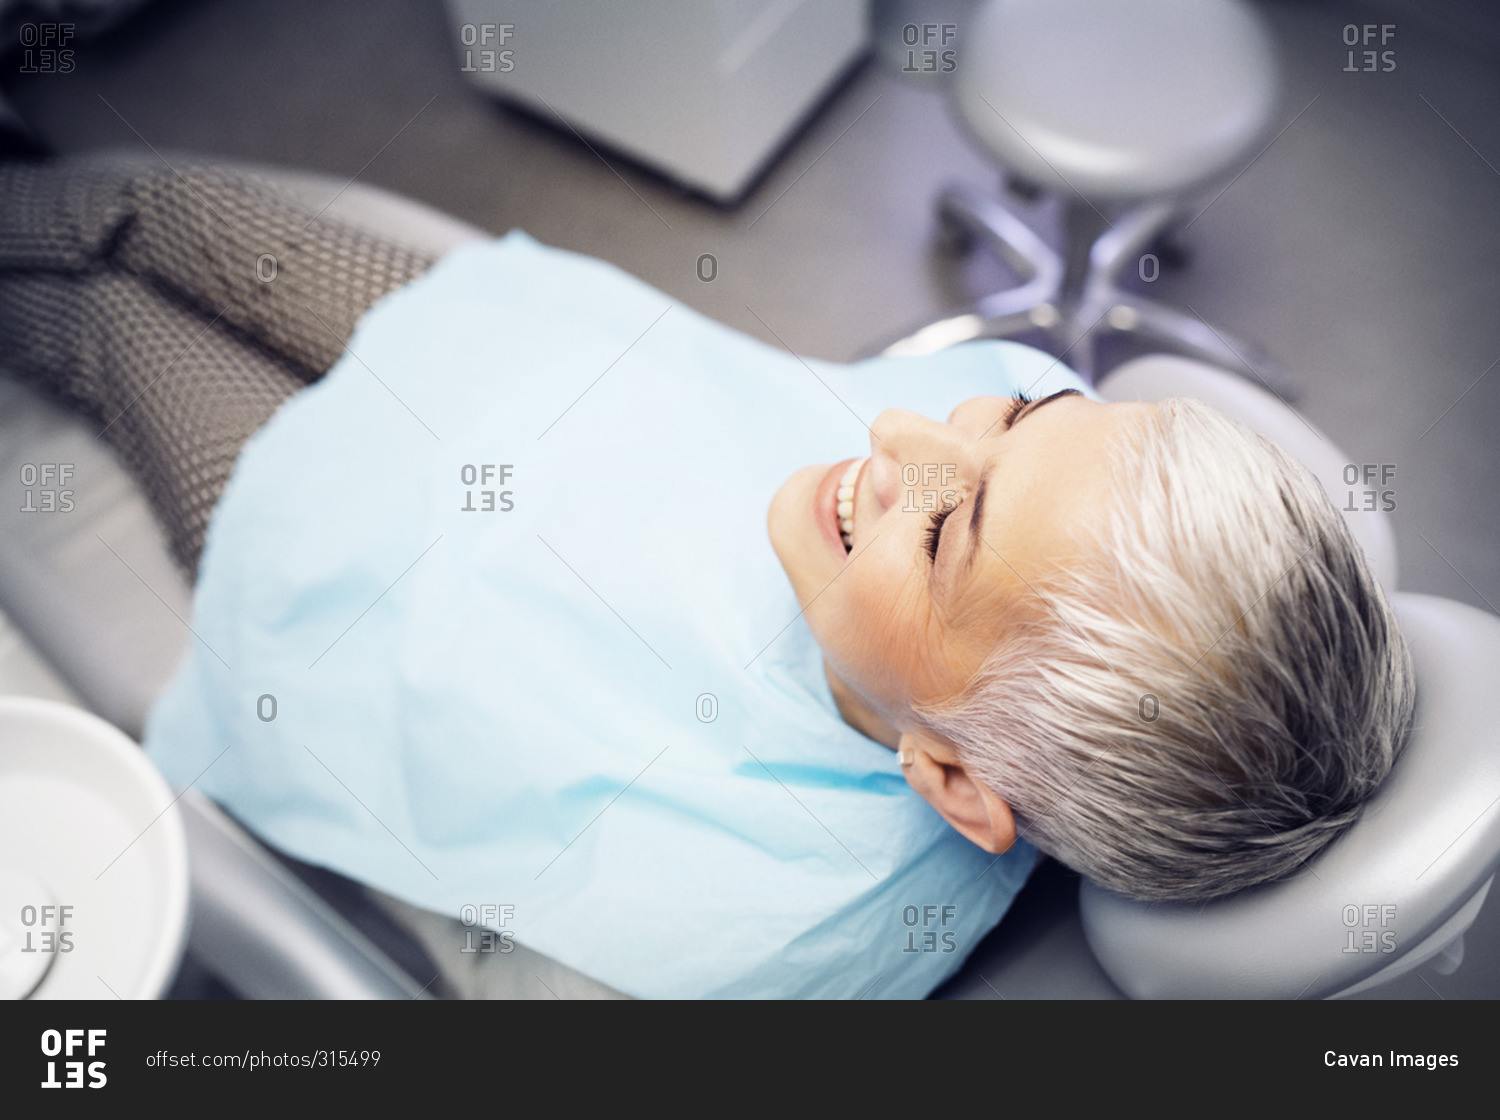 Smiling woman reclining in dentist chair